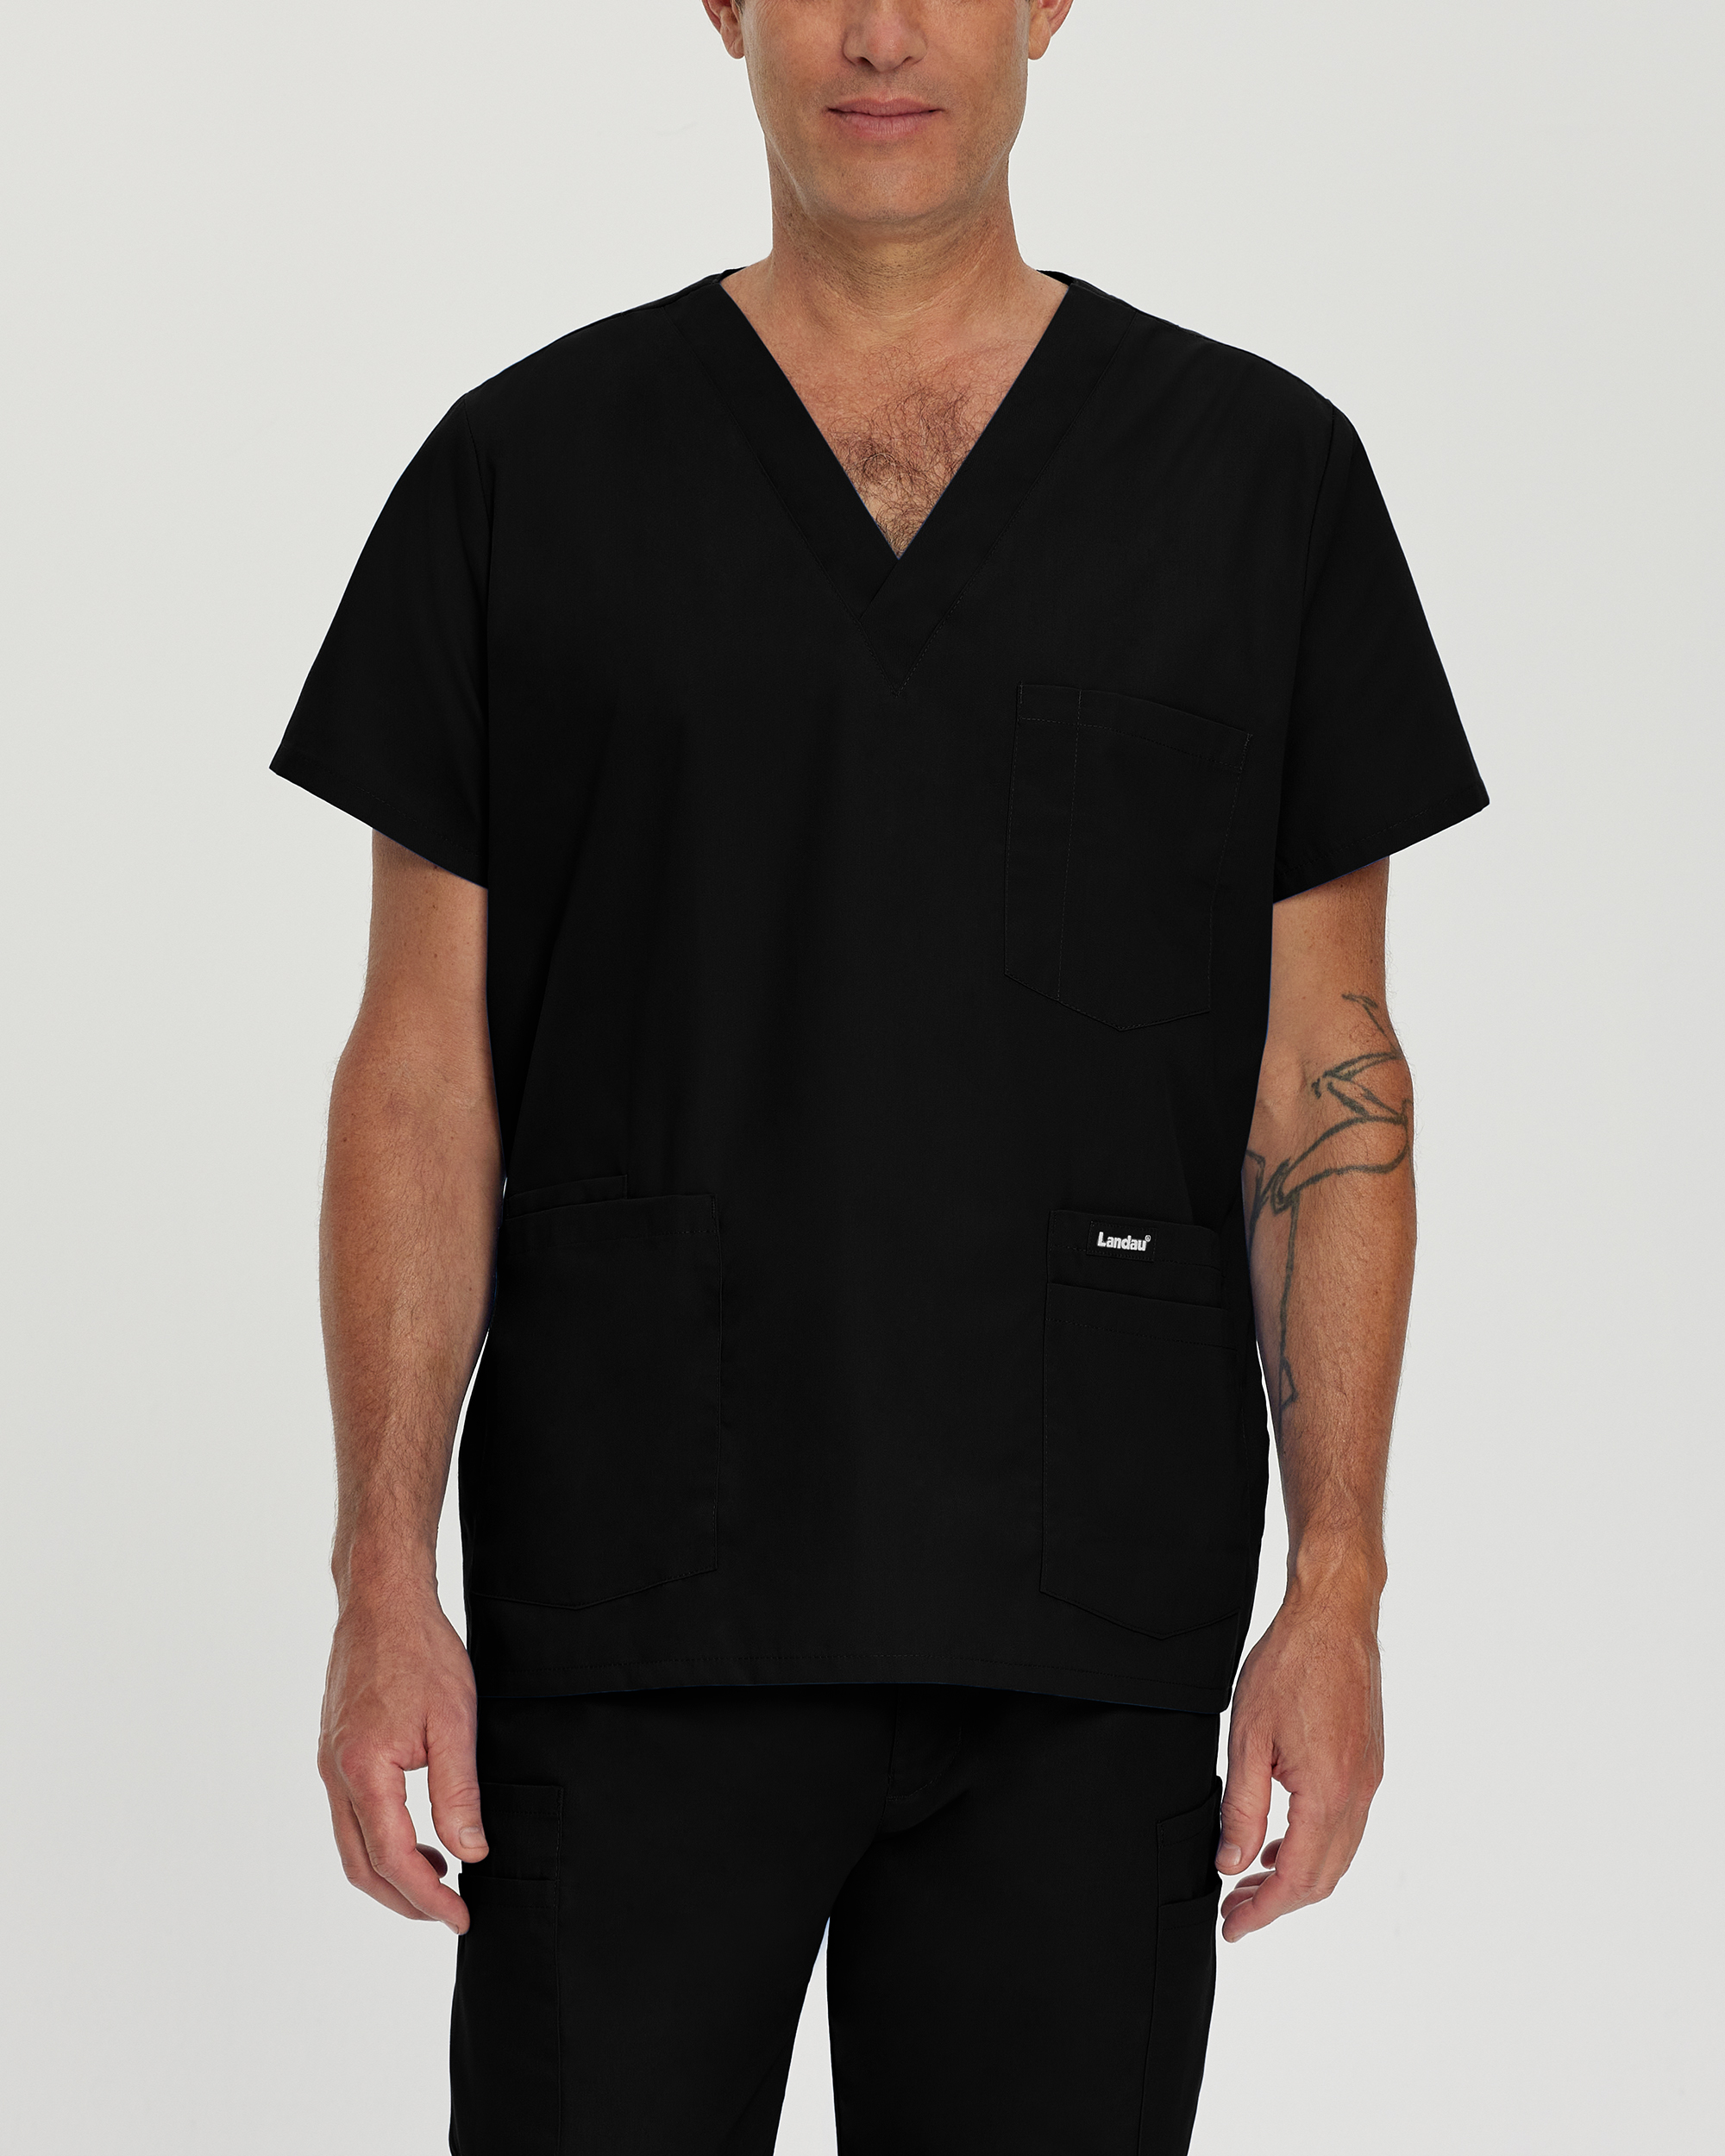 Does this durable scrub top have locker loops and what are they used for?